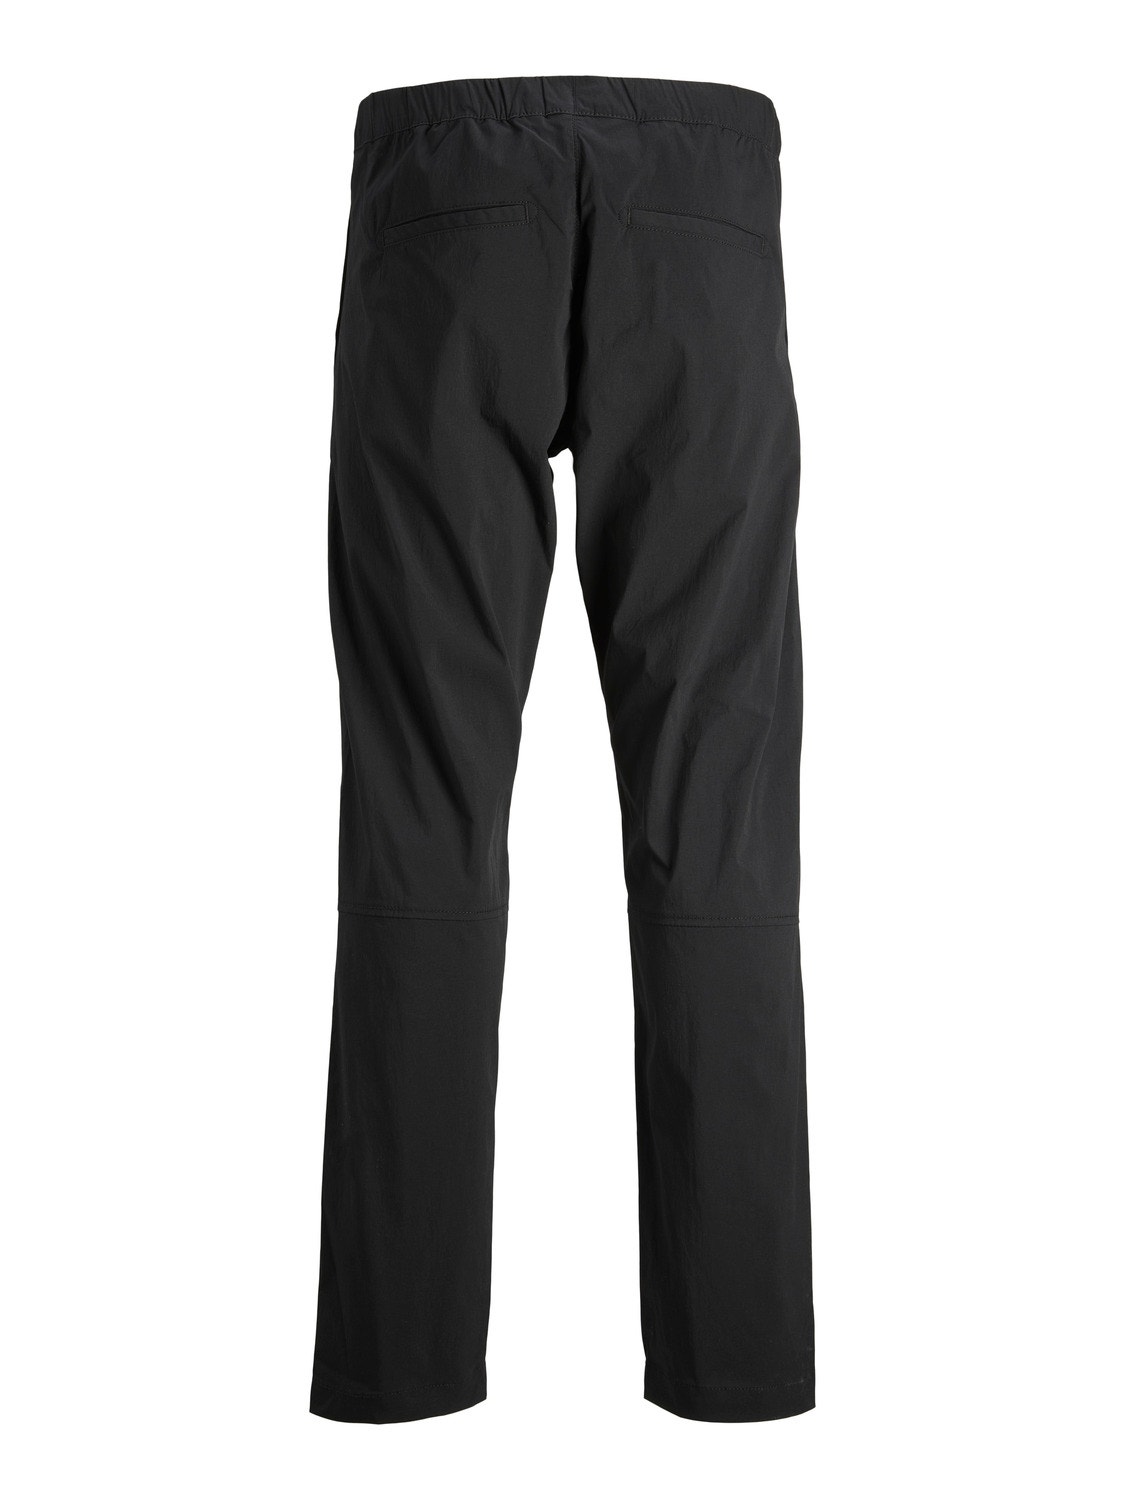 Jack & Jones Relaxed Fit Cargo trousers -Black - 12219320